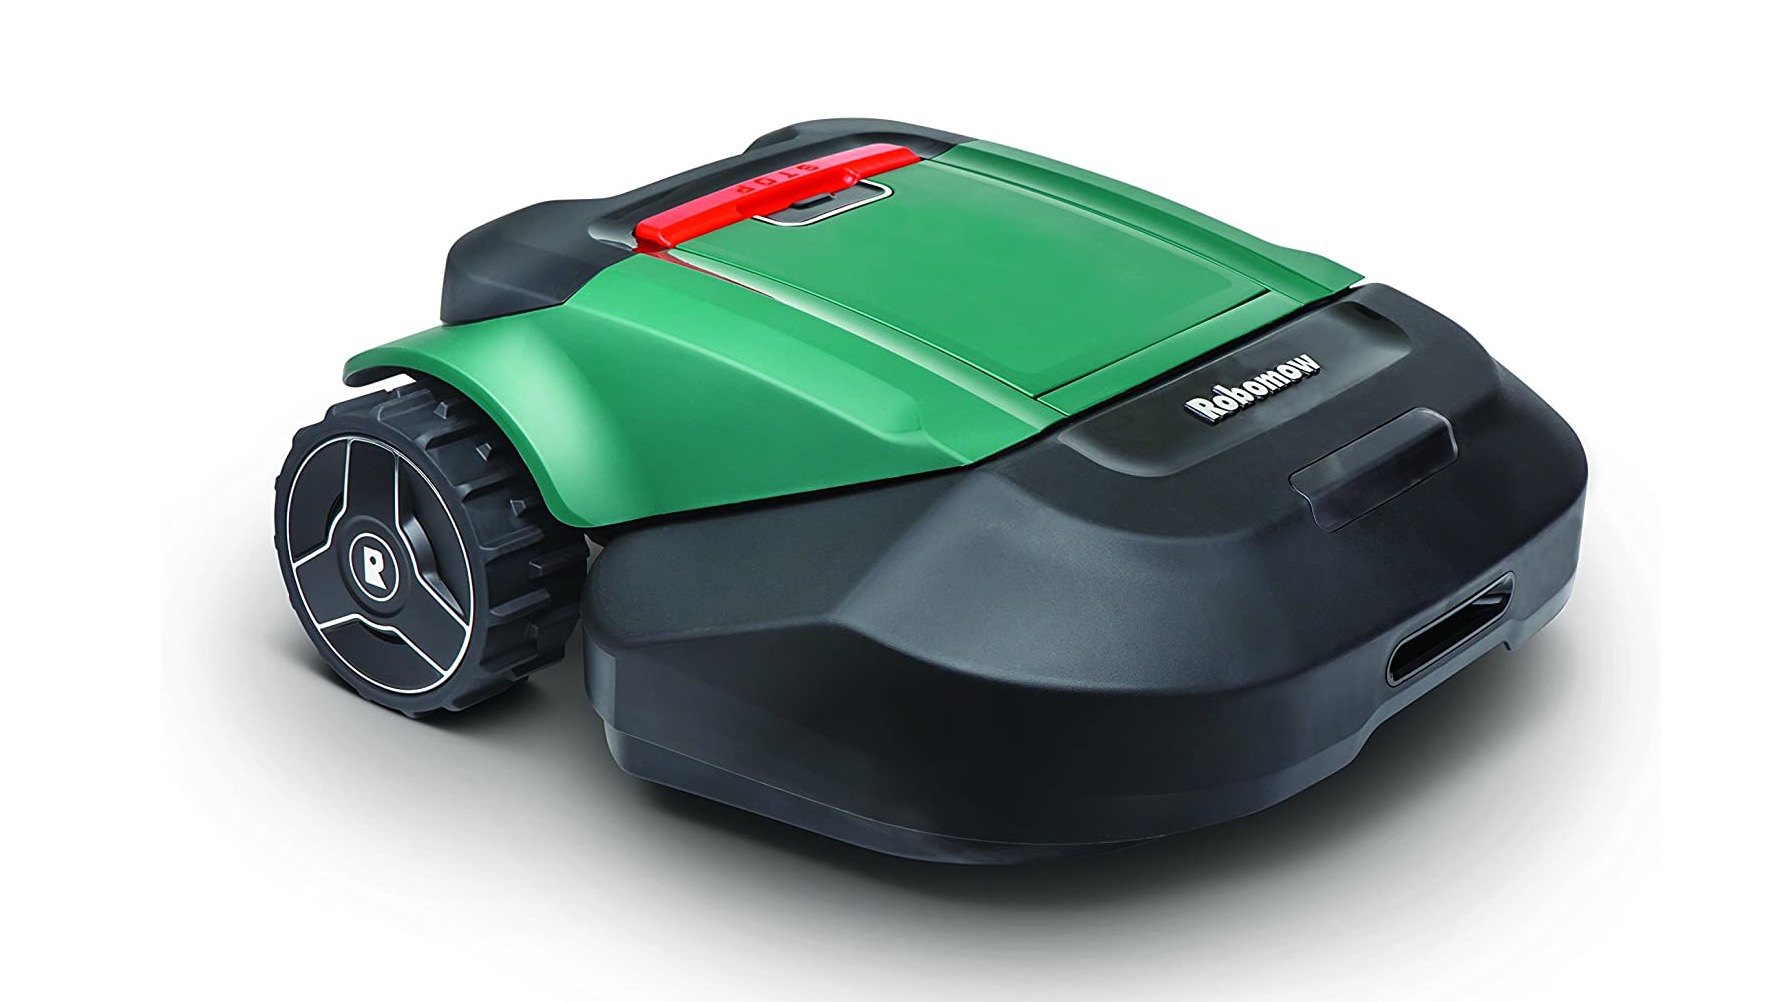 Robomow RS620 robot lawn mower - The best robot lawn mowers